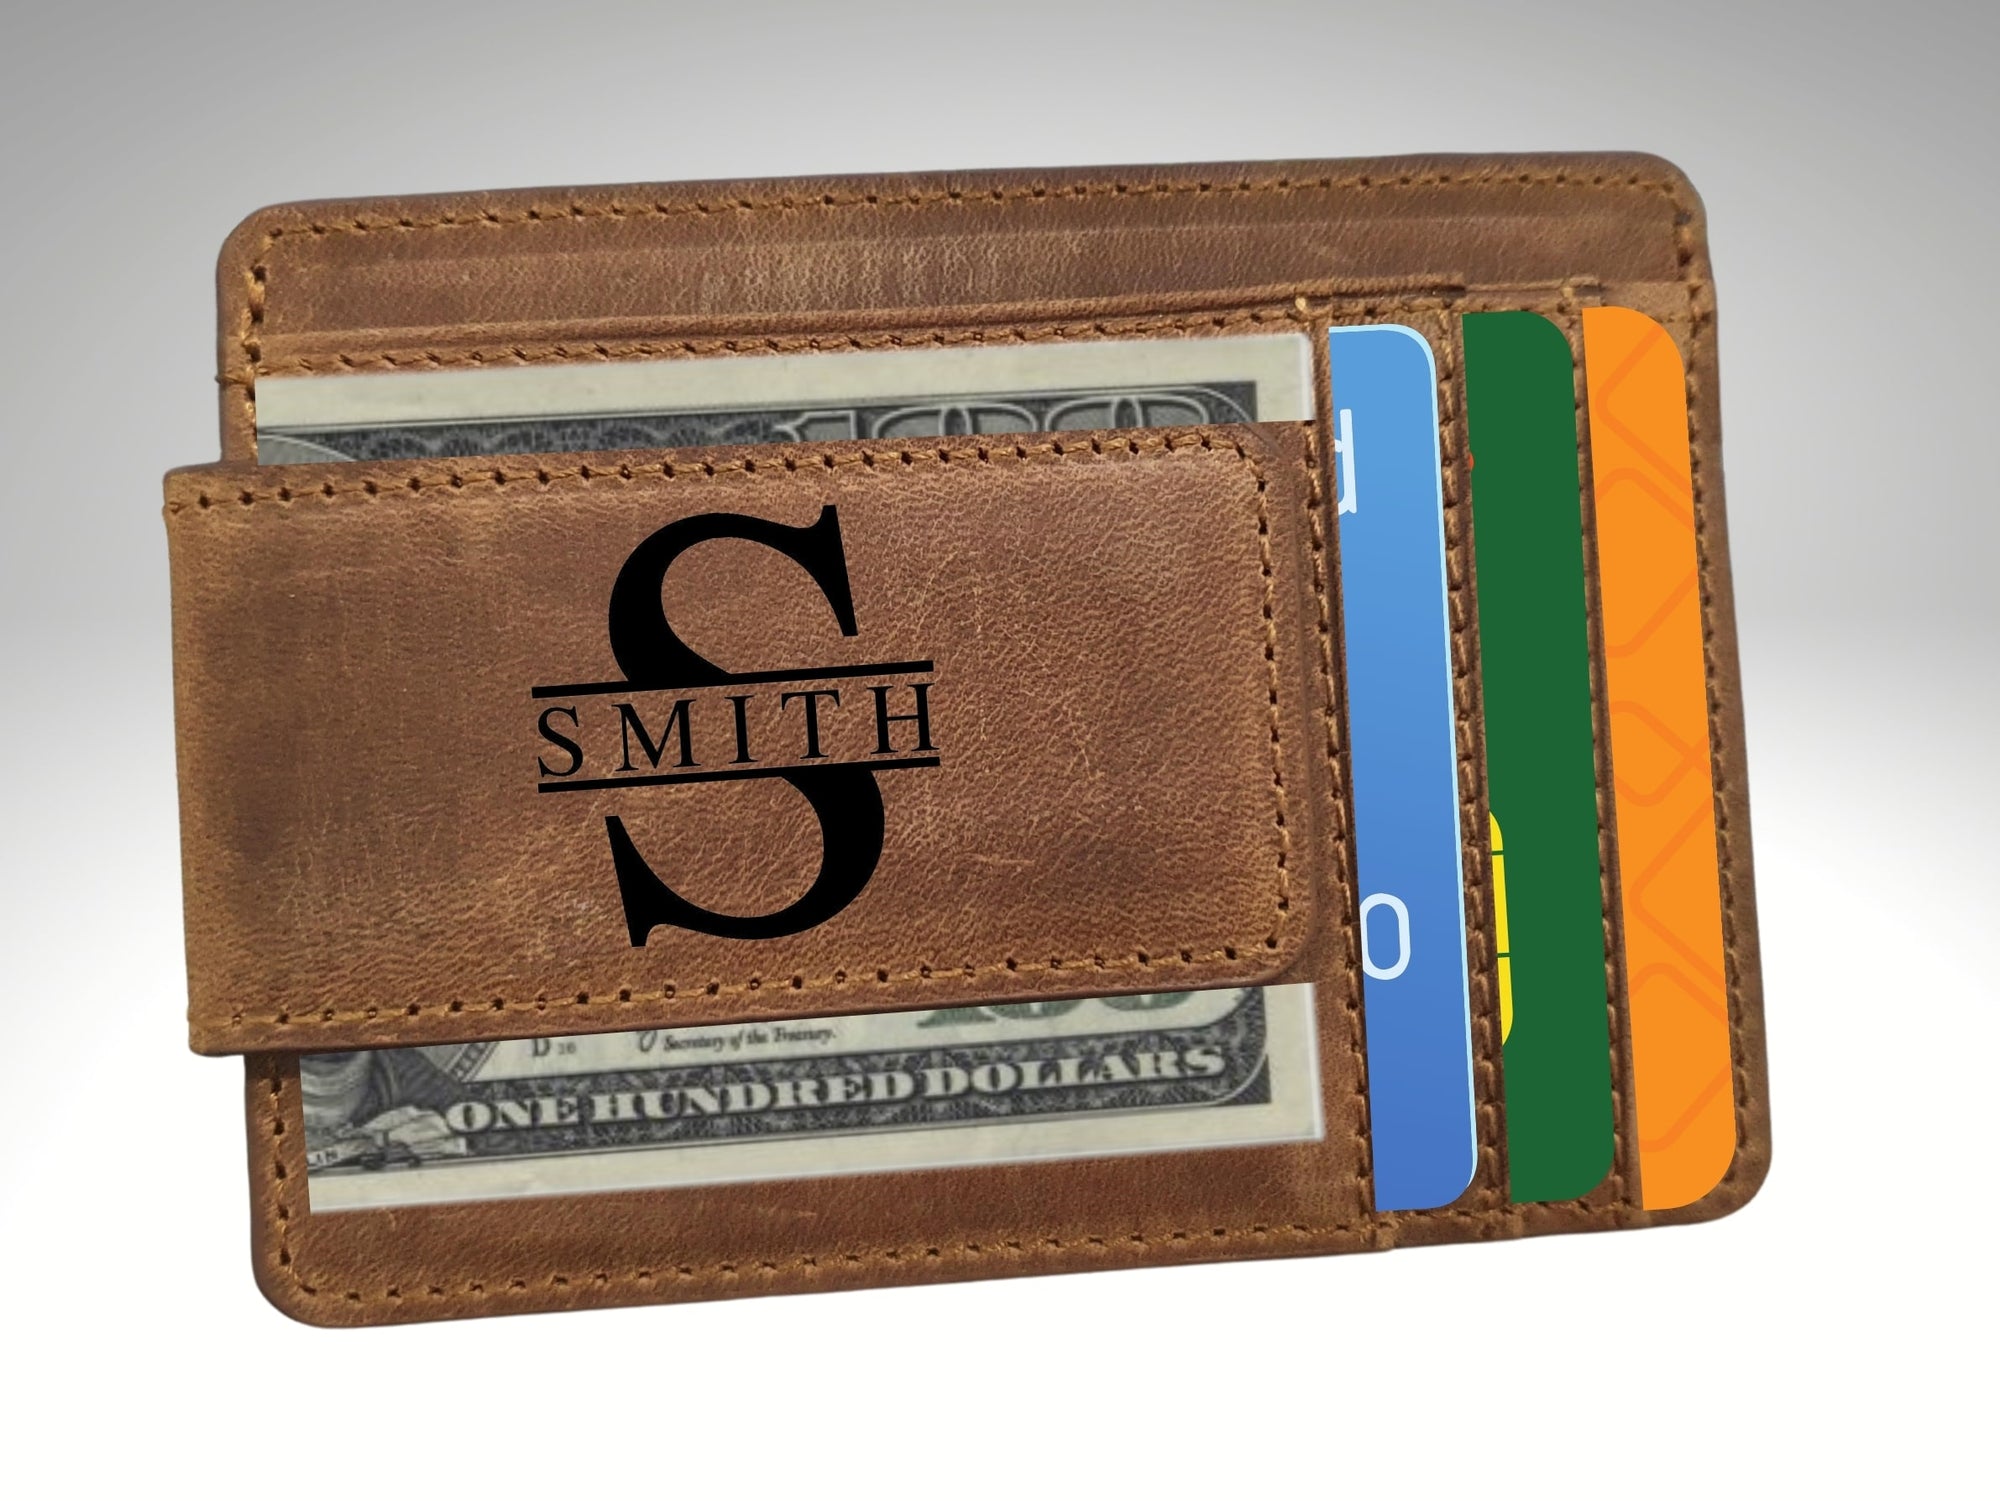 Personalized Mens Wallets